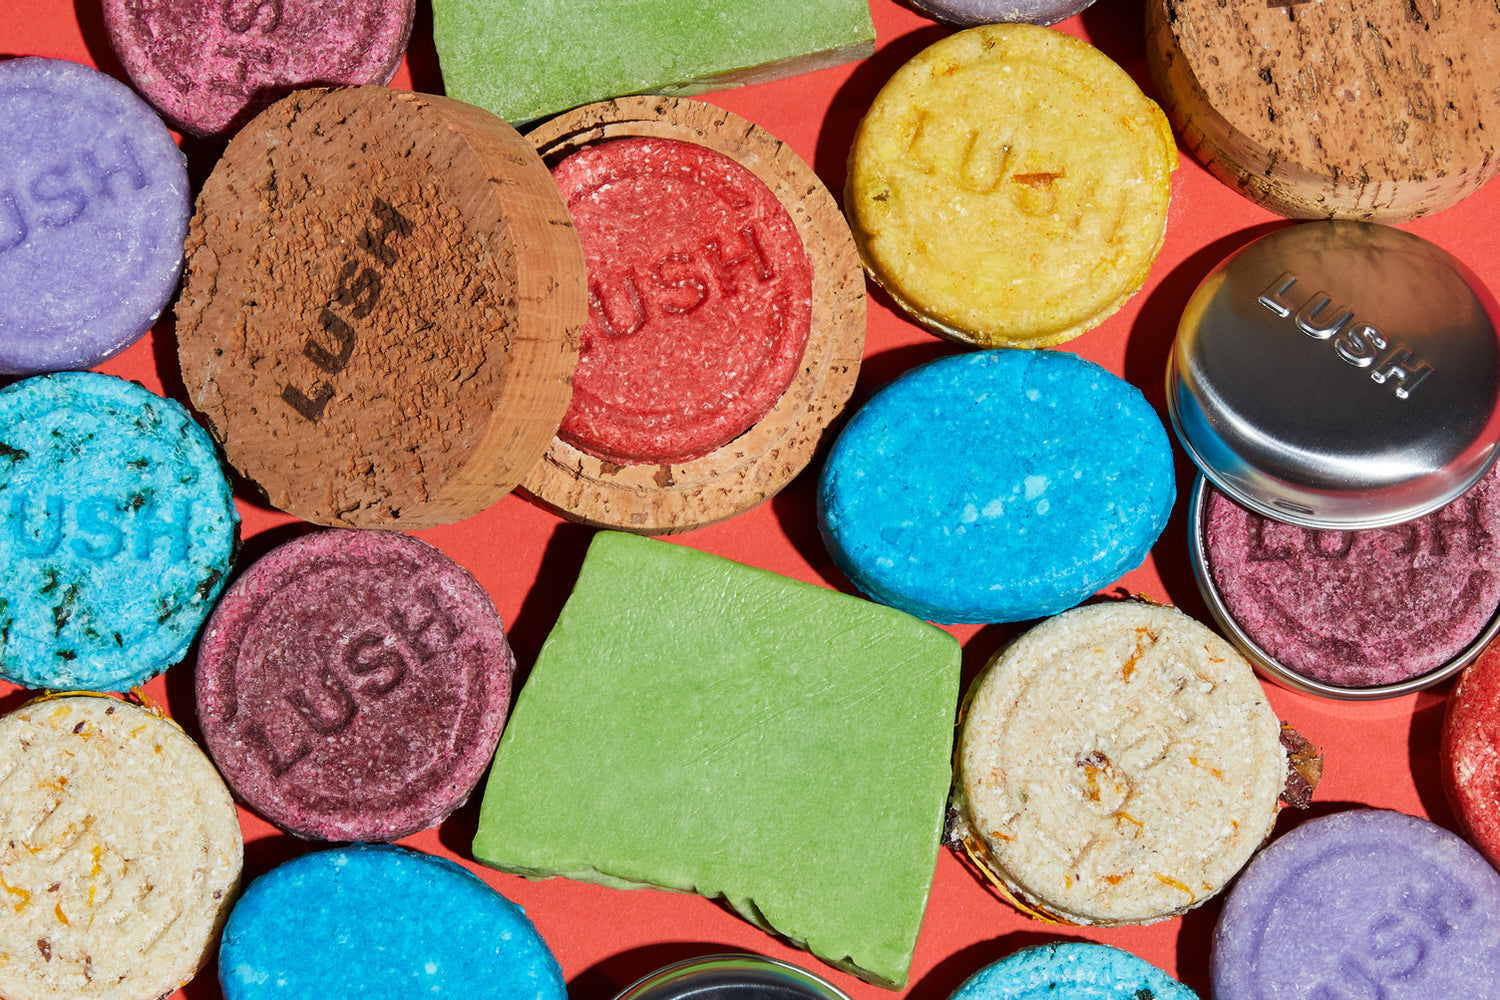 Finding the best shampoo bar for all hair types